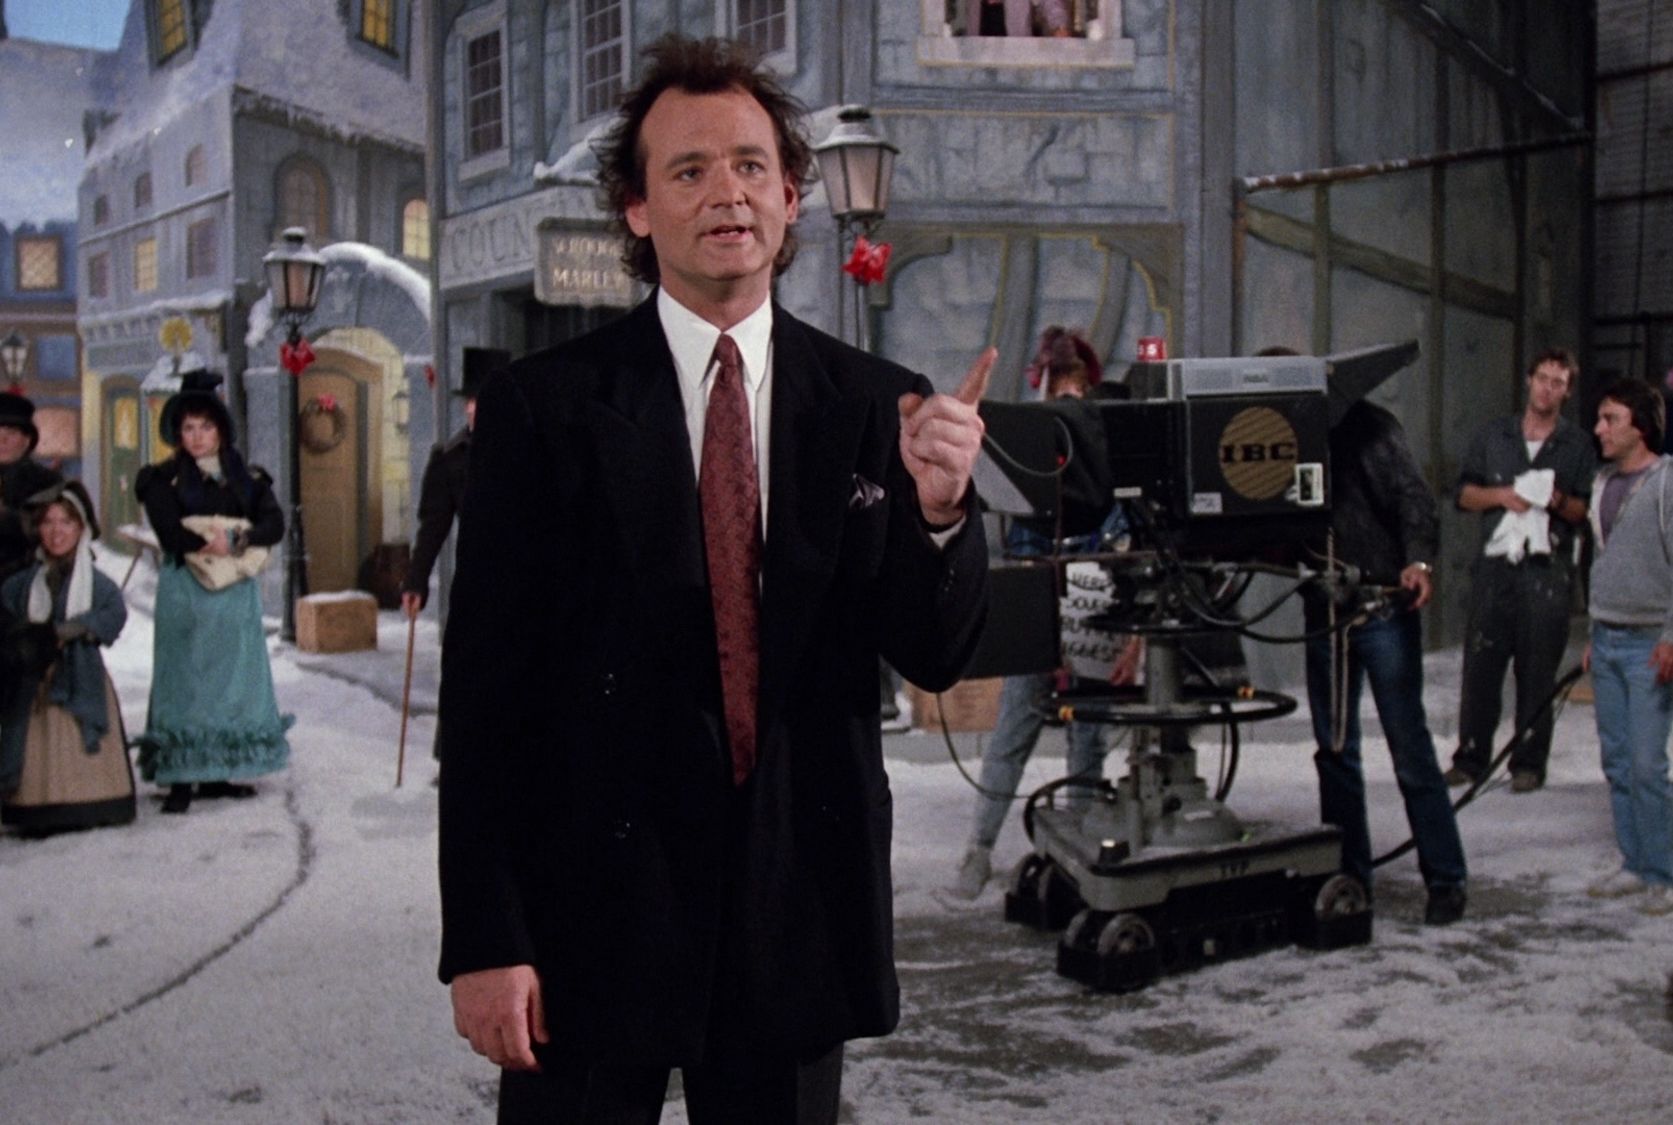 Still from Scrooged, showing Frank Cross on the set of the in-universe A Christmas Carol adaptation